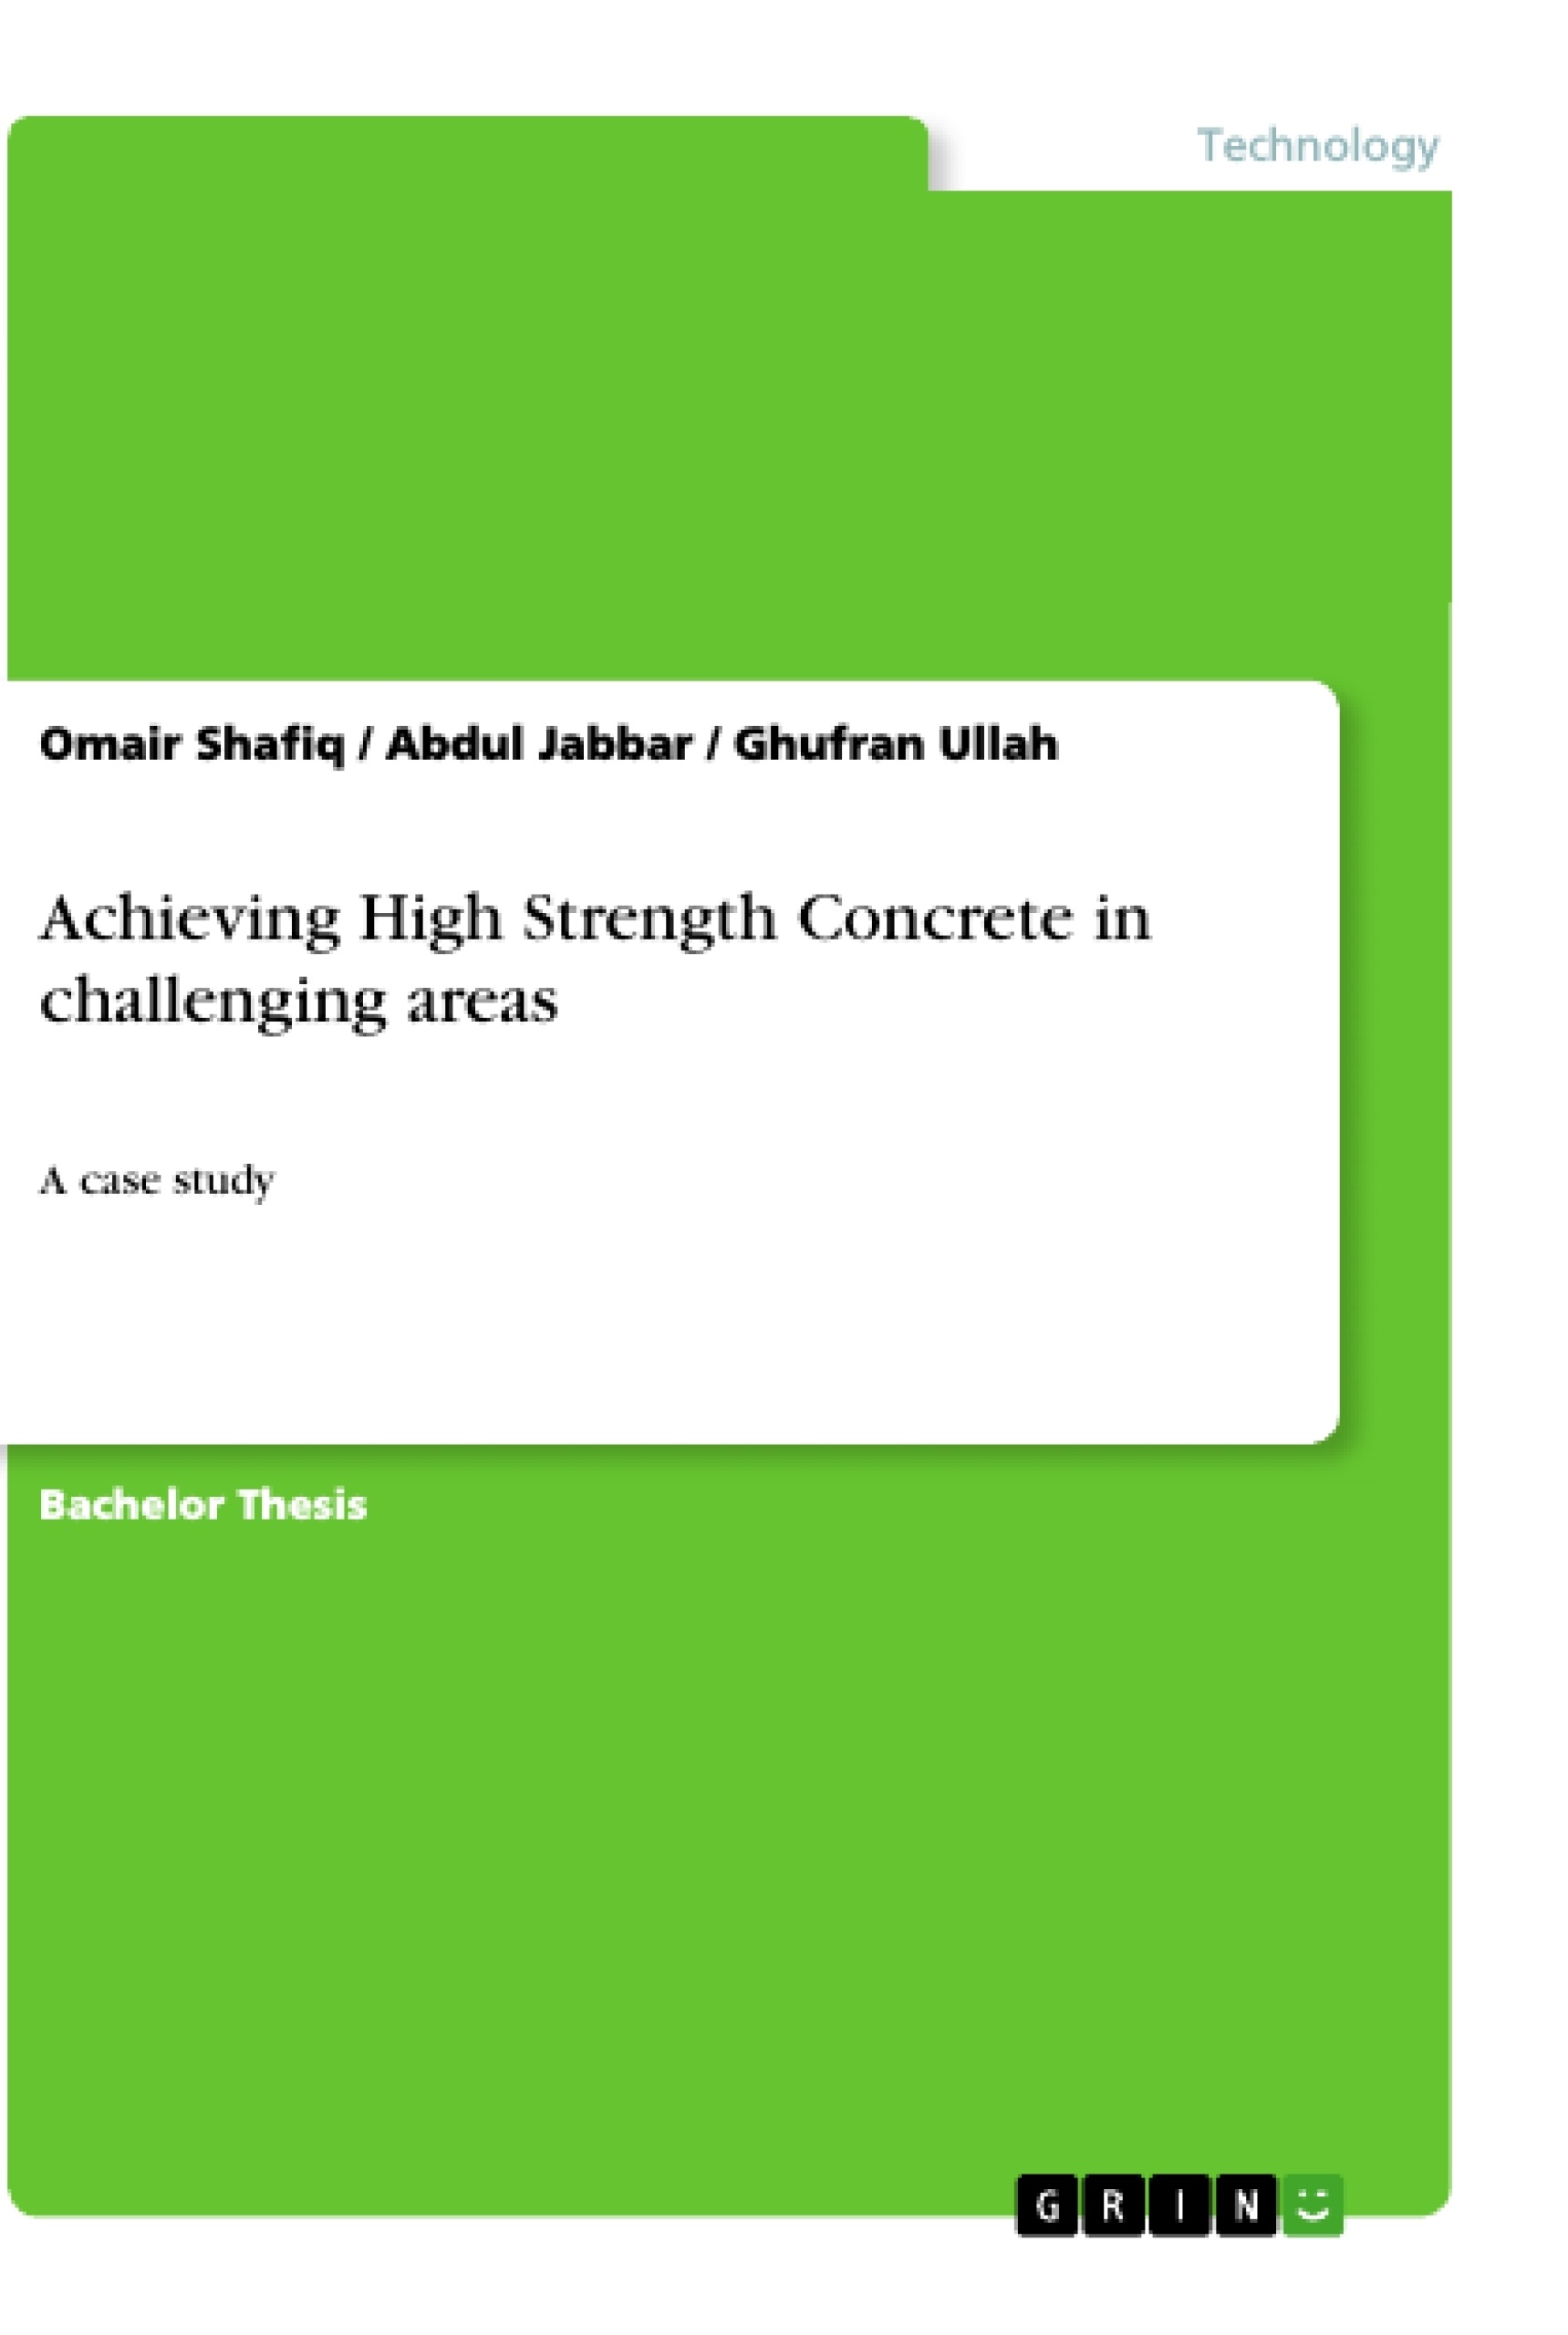 Título: Achieving High Strength Concrete in challenging areas